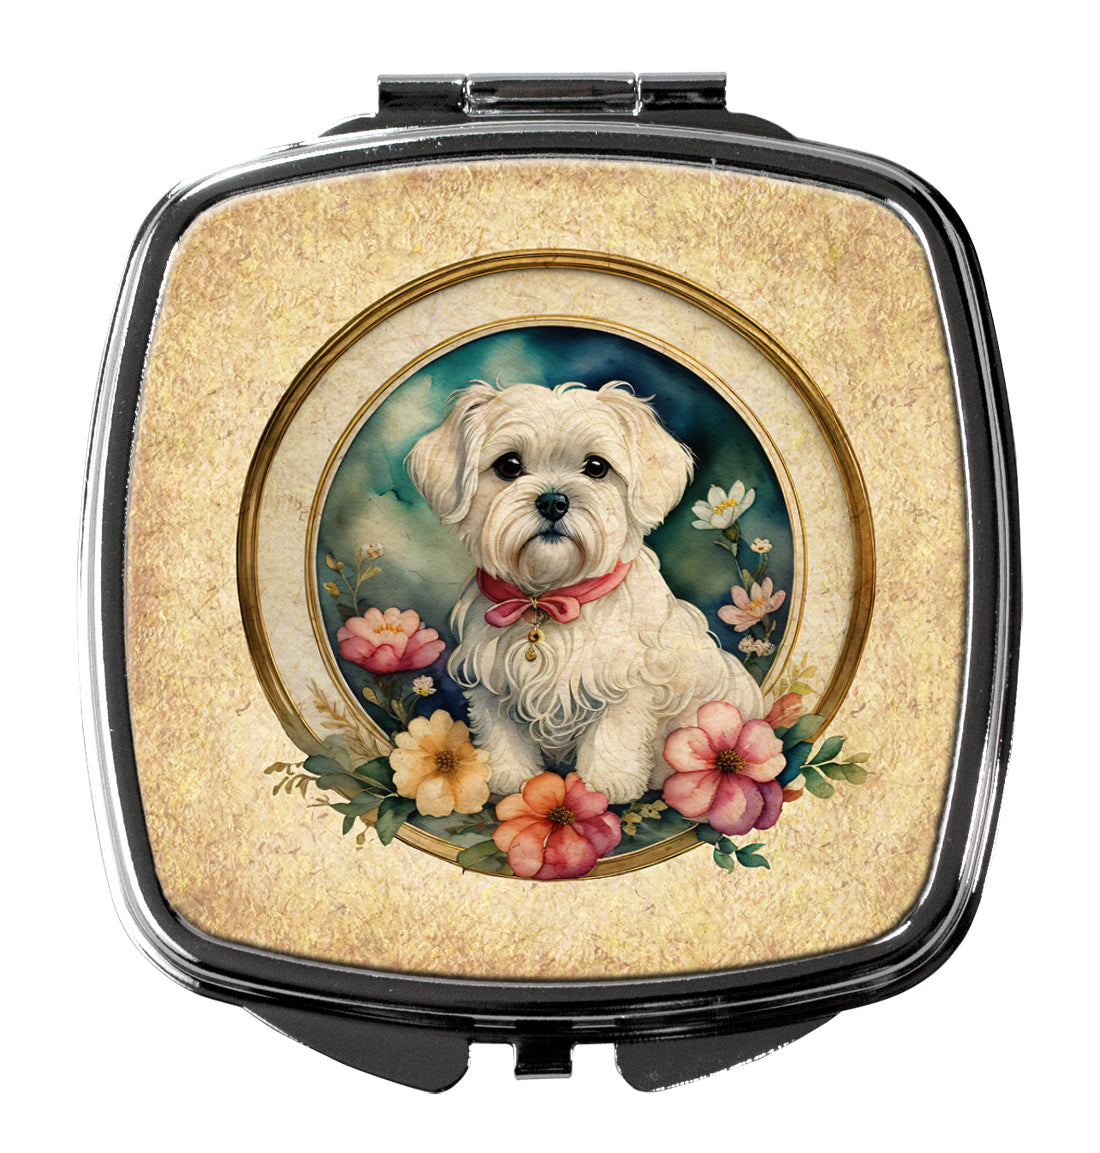 Buy this Maltese and Flowers Compact Mirror